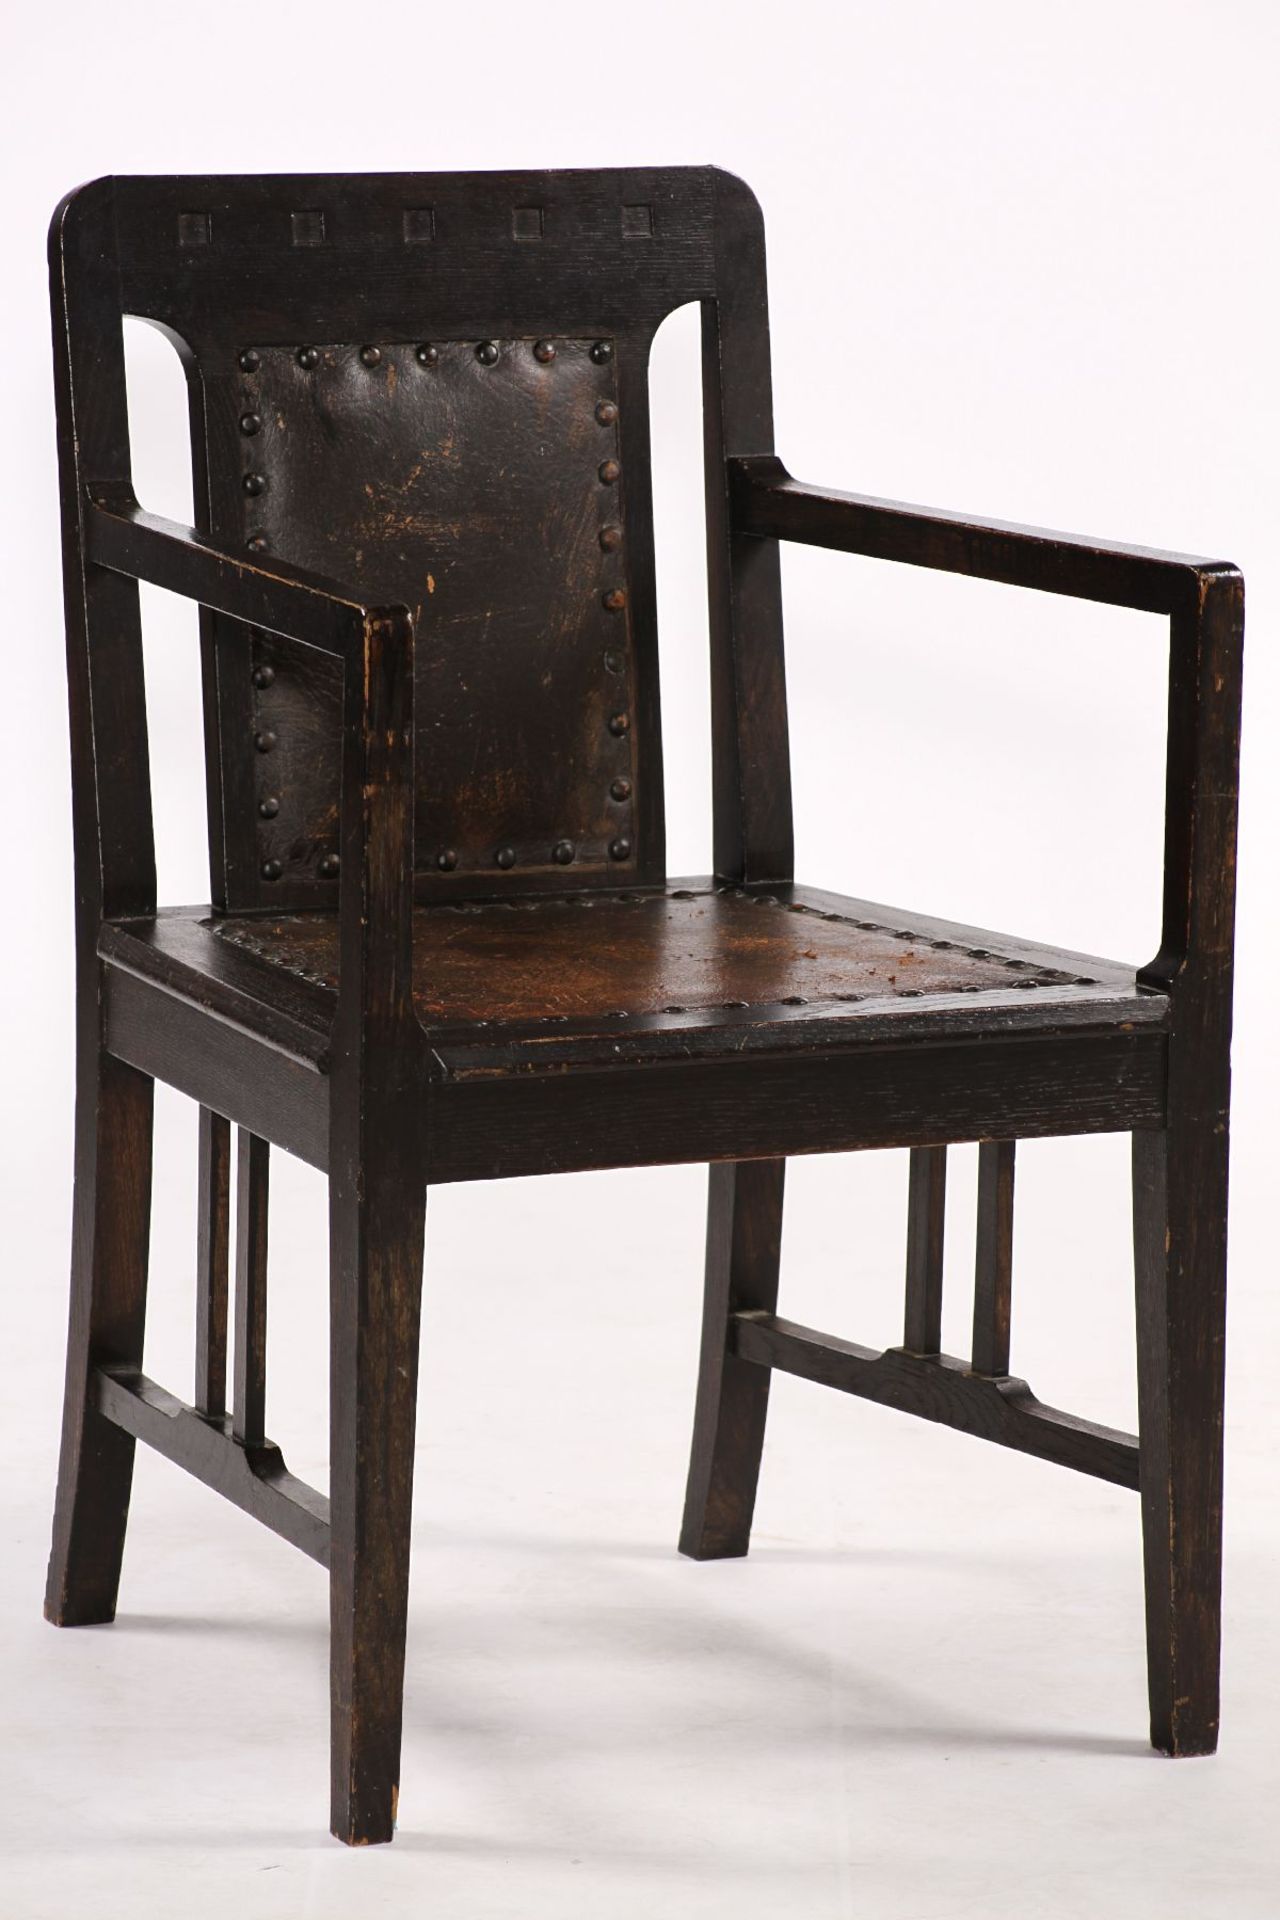 Armchair, German, around 1905, pure abstract Art Nouveau, under the great influence of - Image 2 of 3